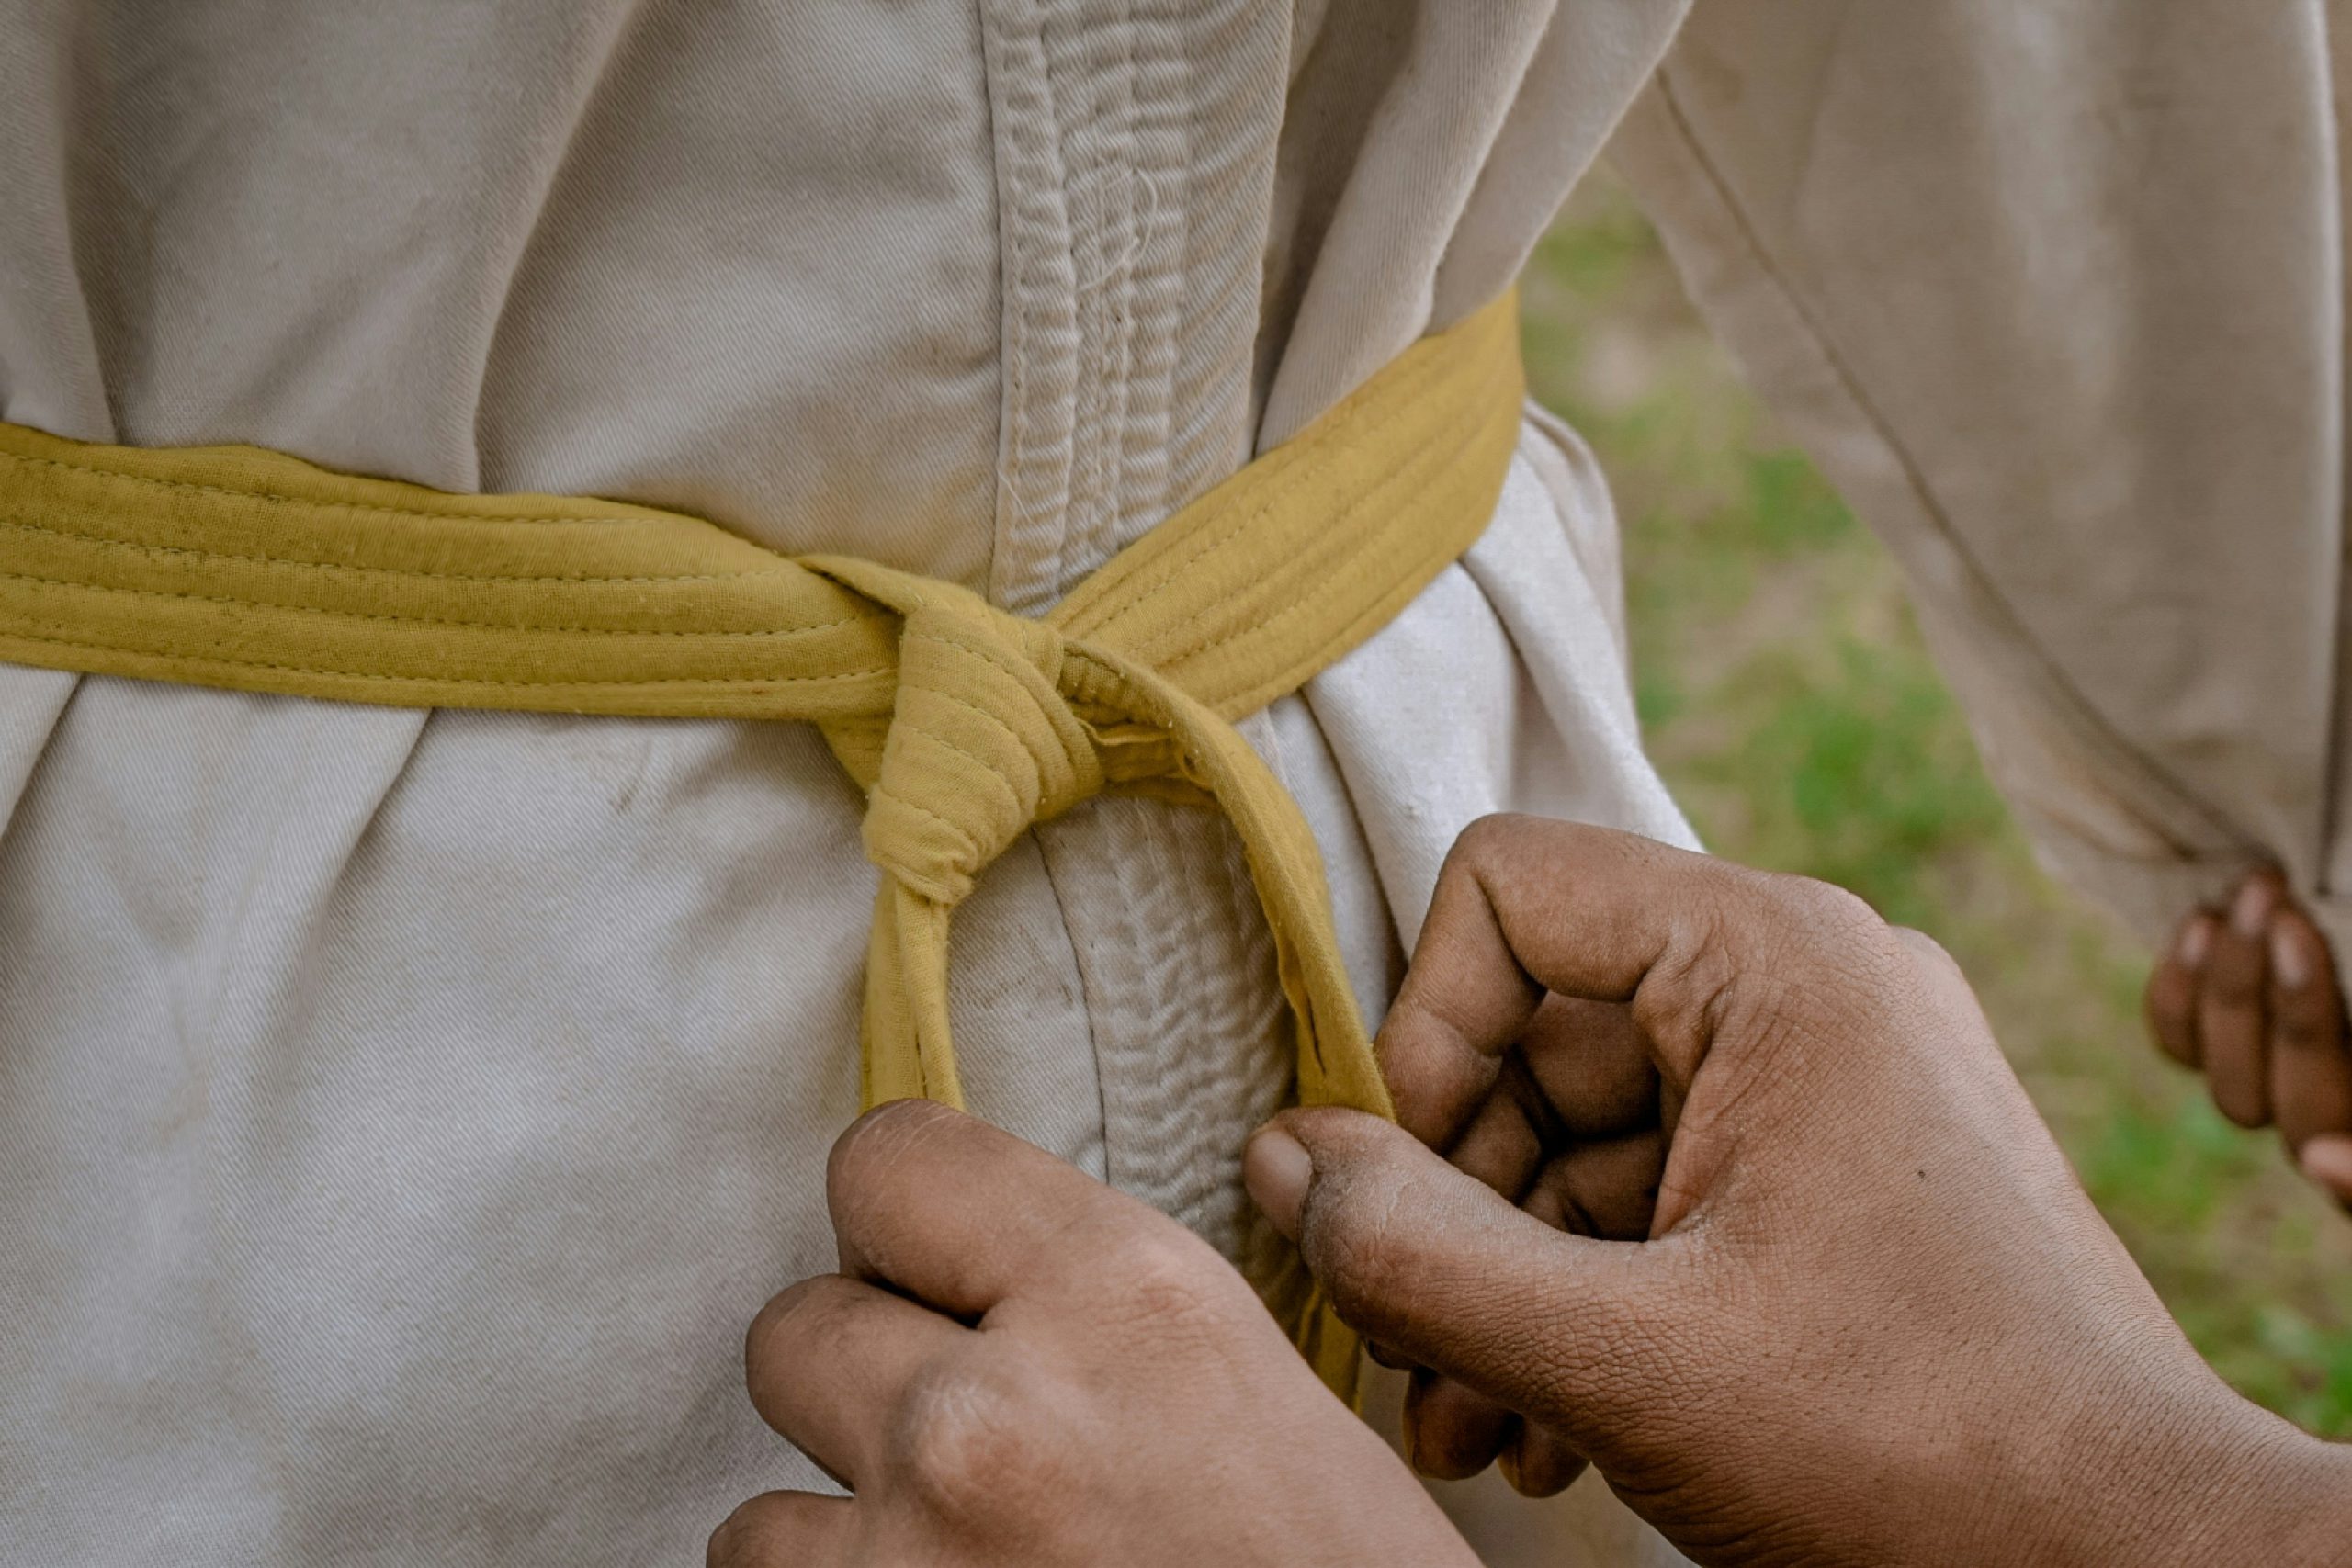 Martial arts classes - an instructor tying a student's belt.
